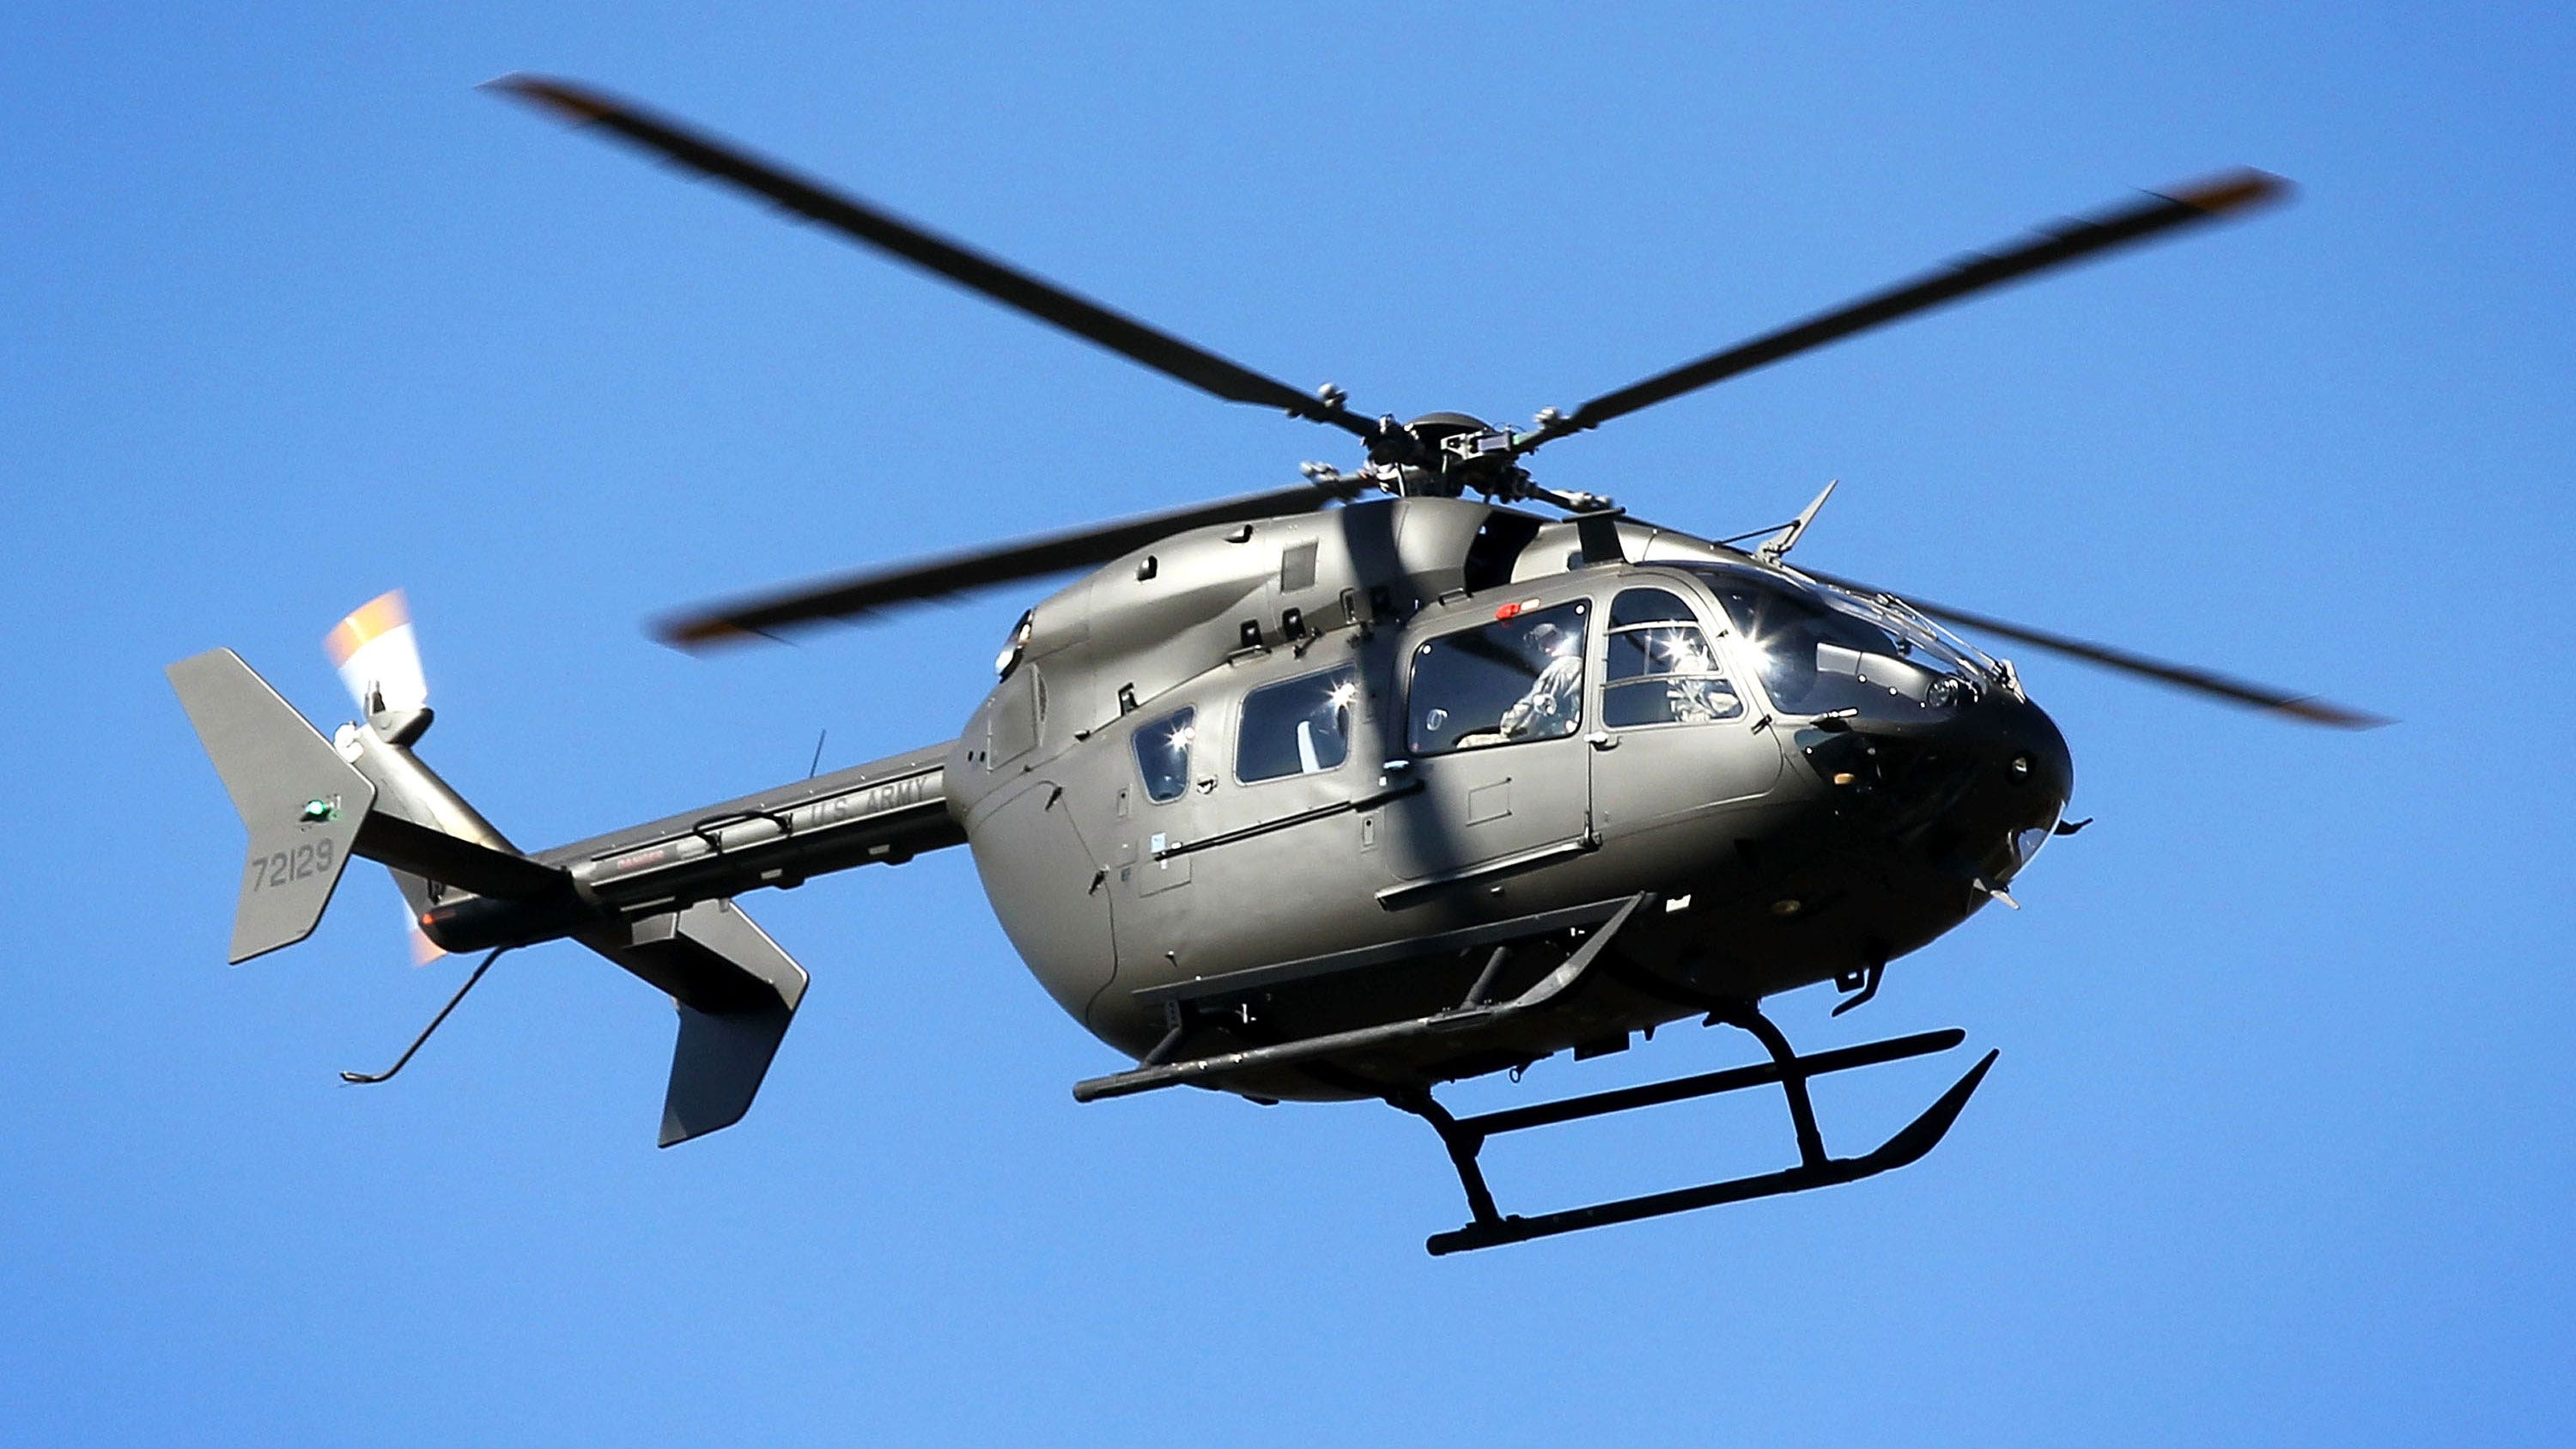 Army helicopter crash lands in Alabama during flight training